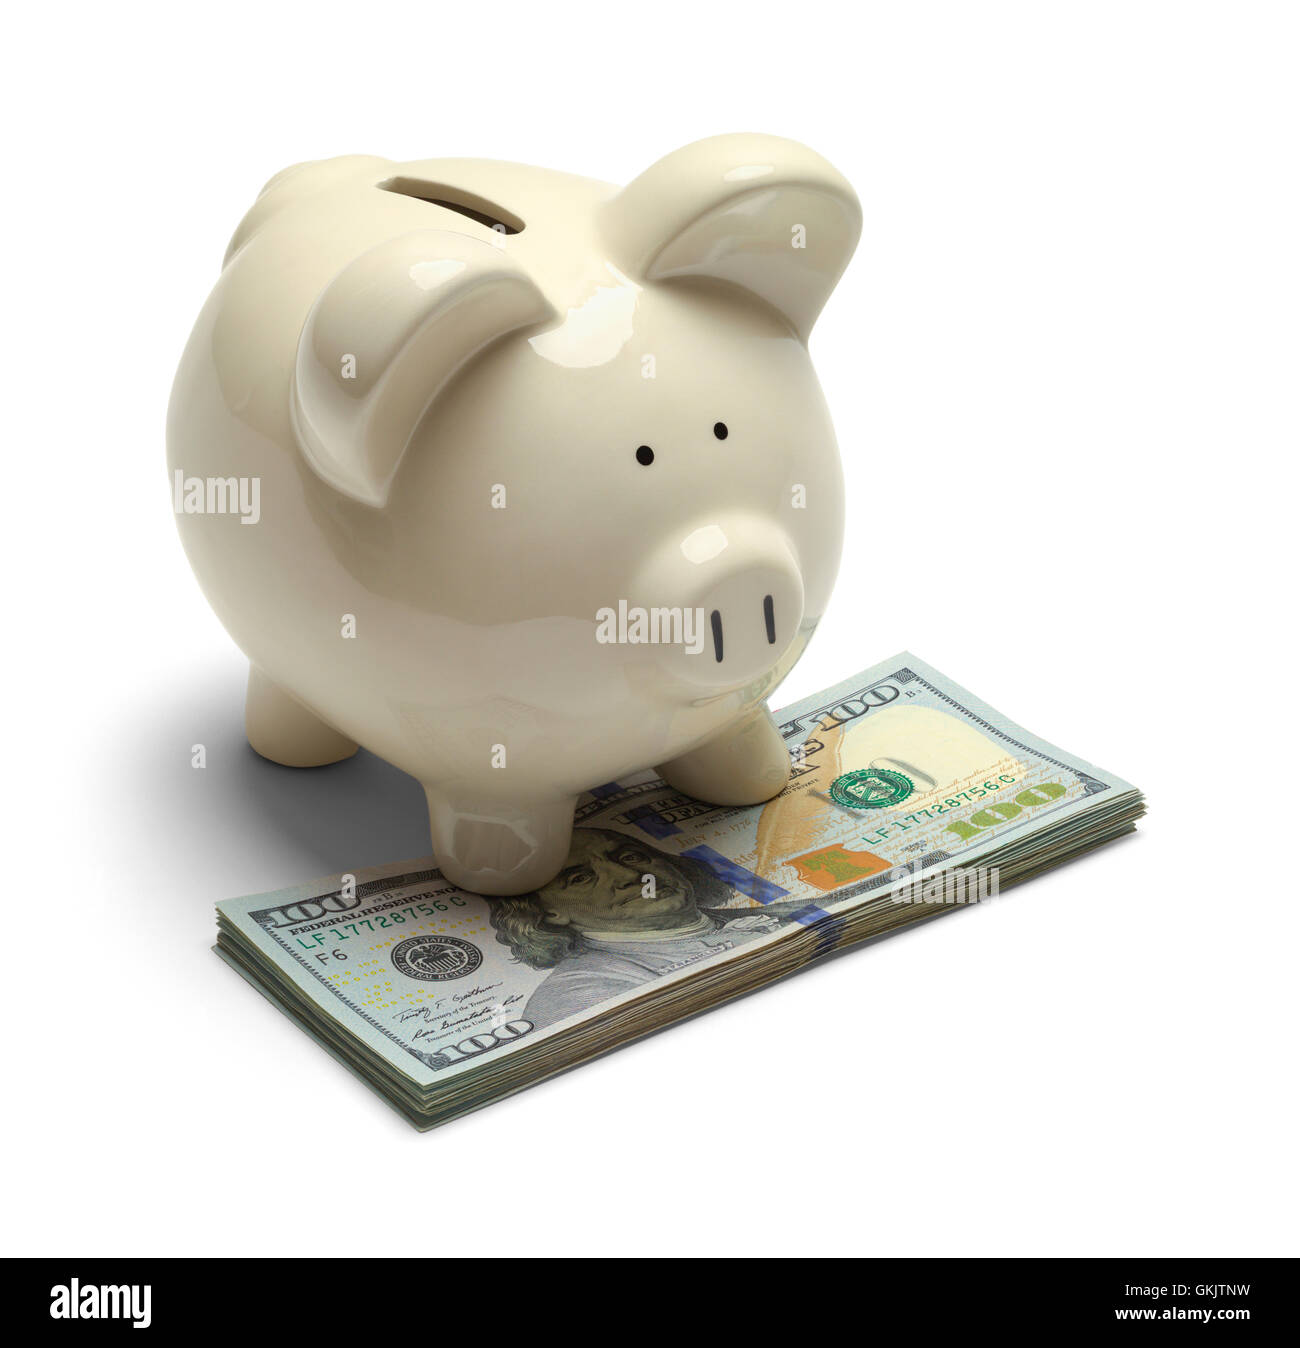 Piggy Bank Standing on Cash Money Isolated on White Background. Stock Photo